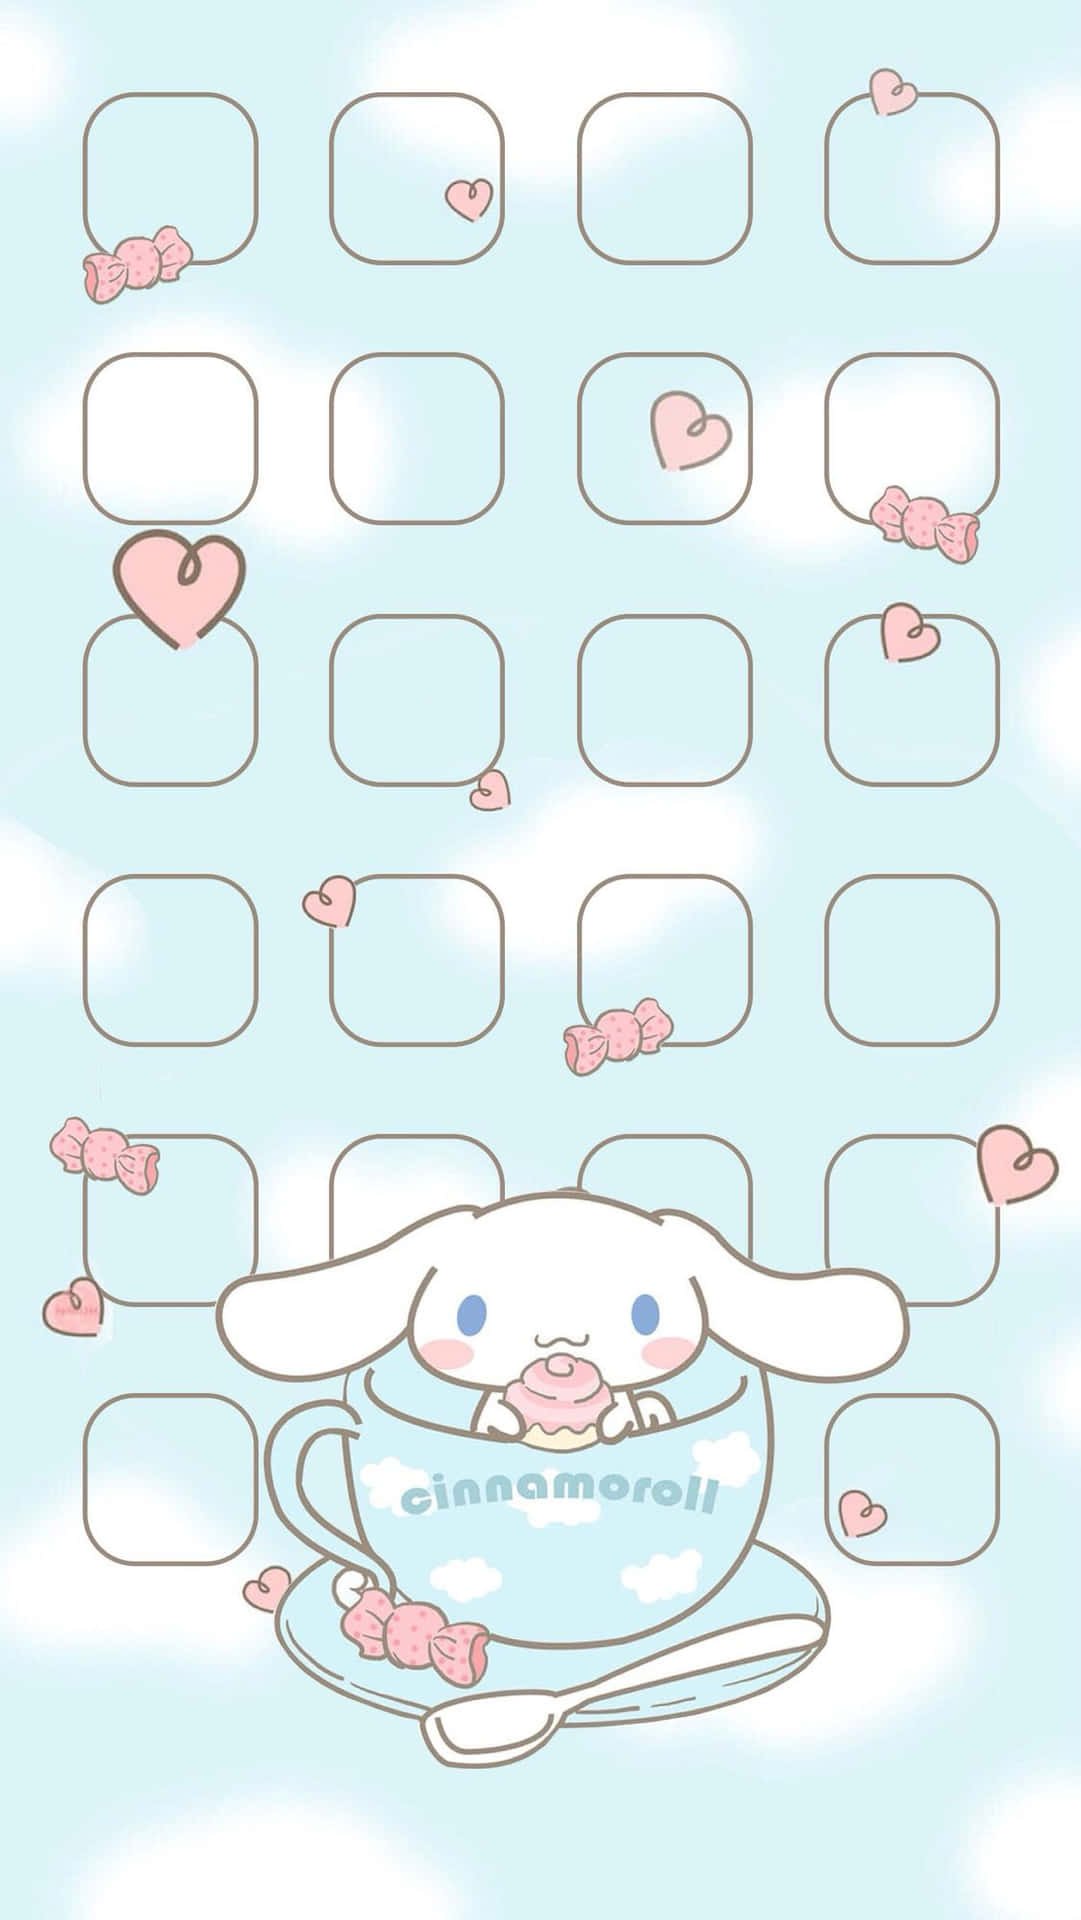 Get ready to spread some cheer with the Sanrio Phone! Wallpaper